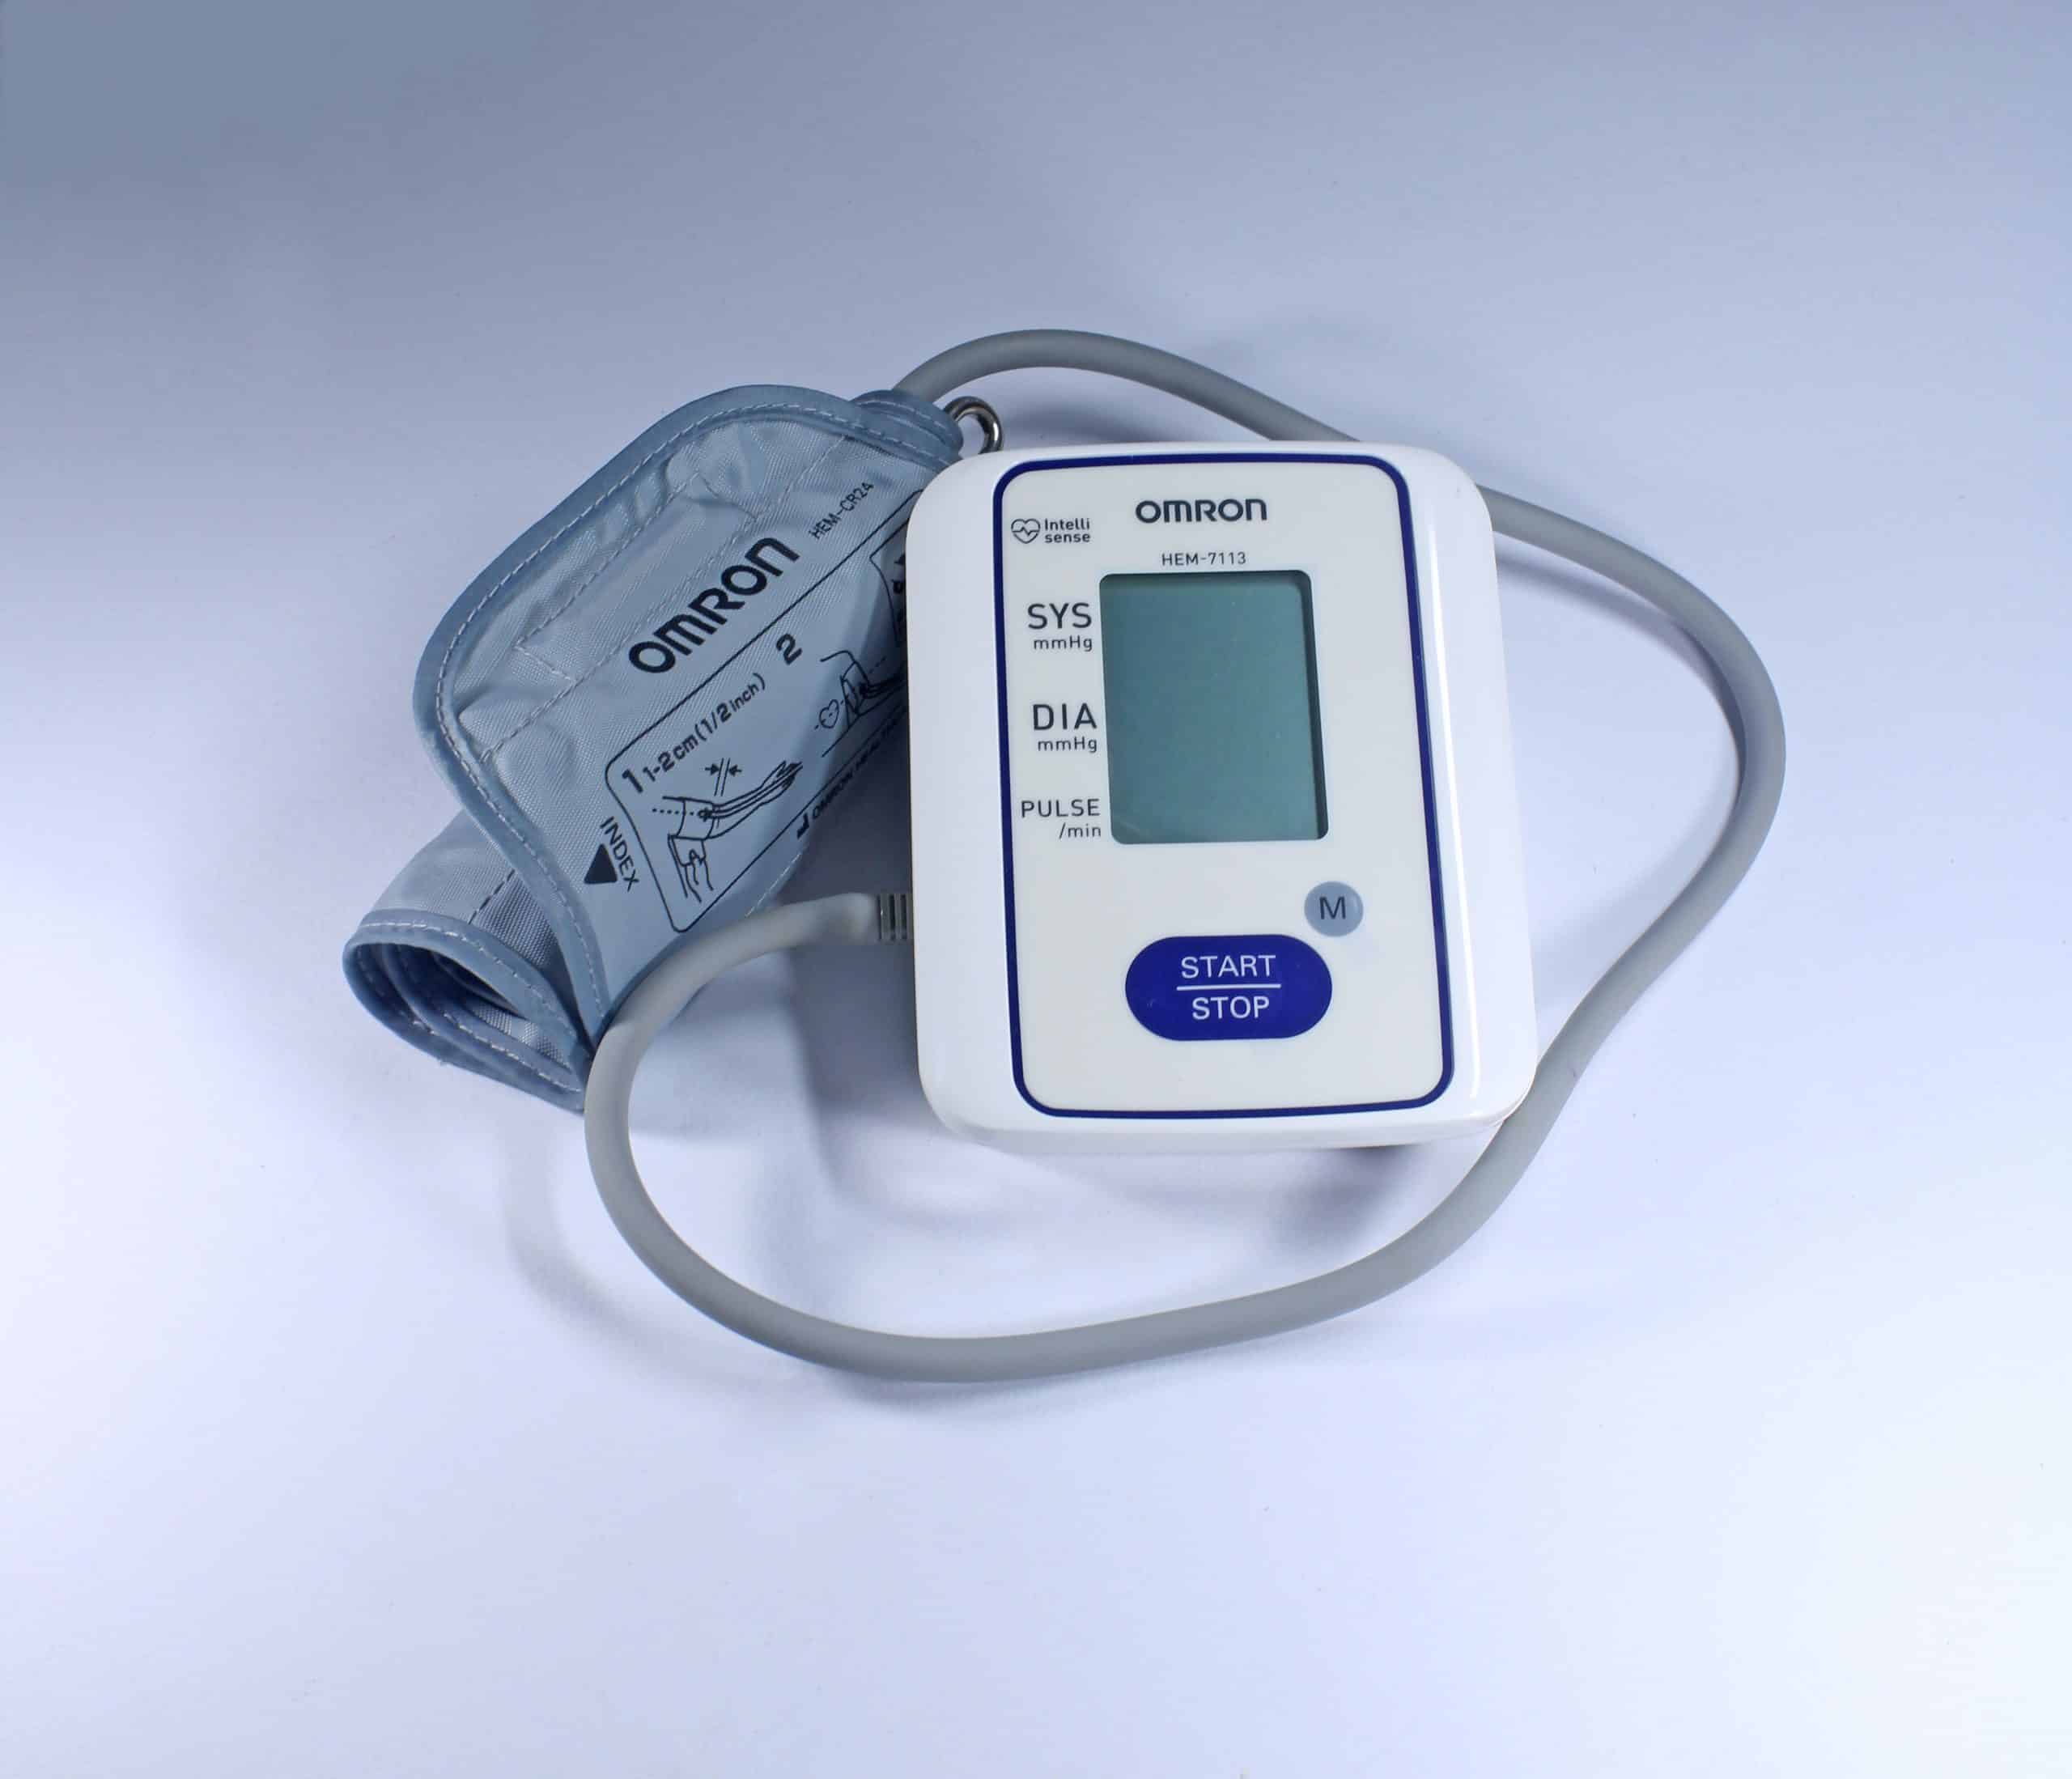 omron brand blood pressure monitor with cuff